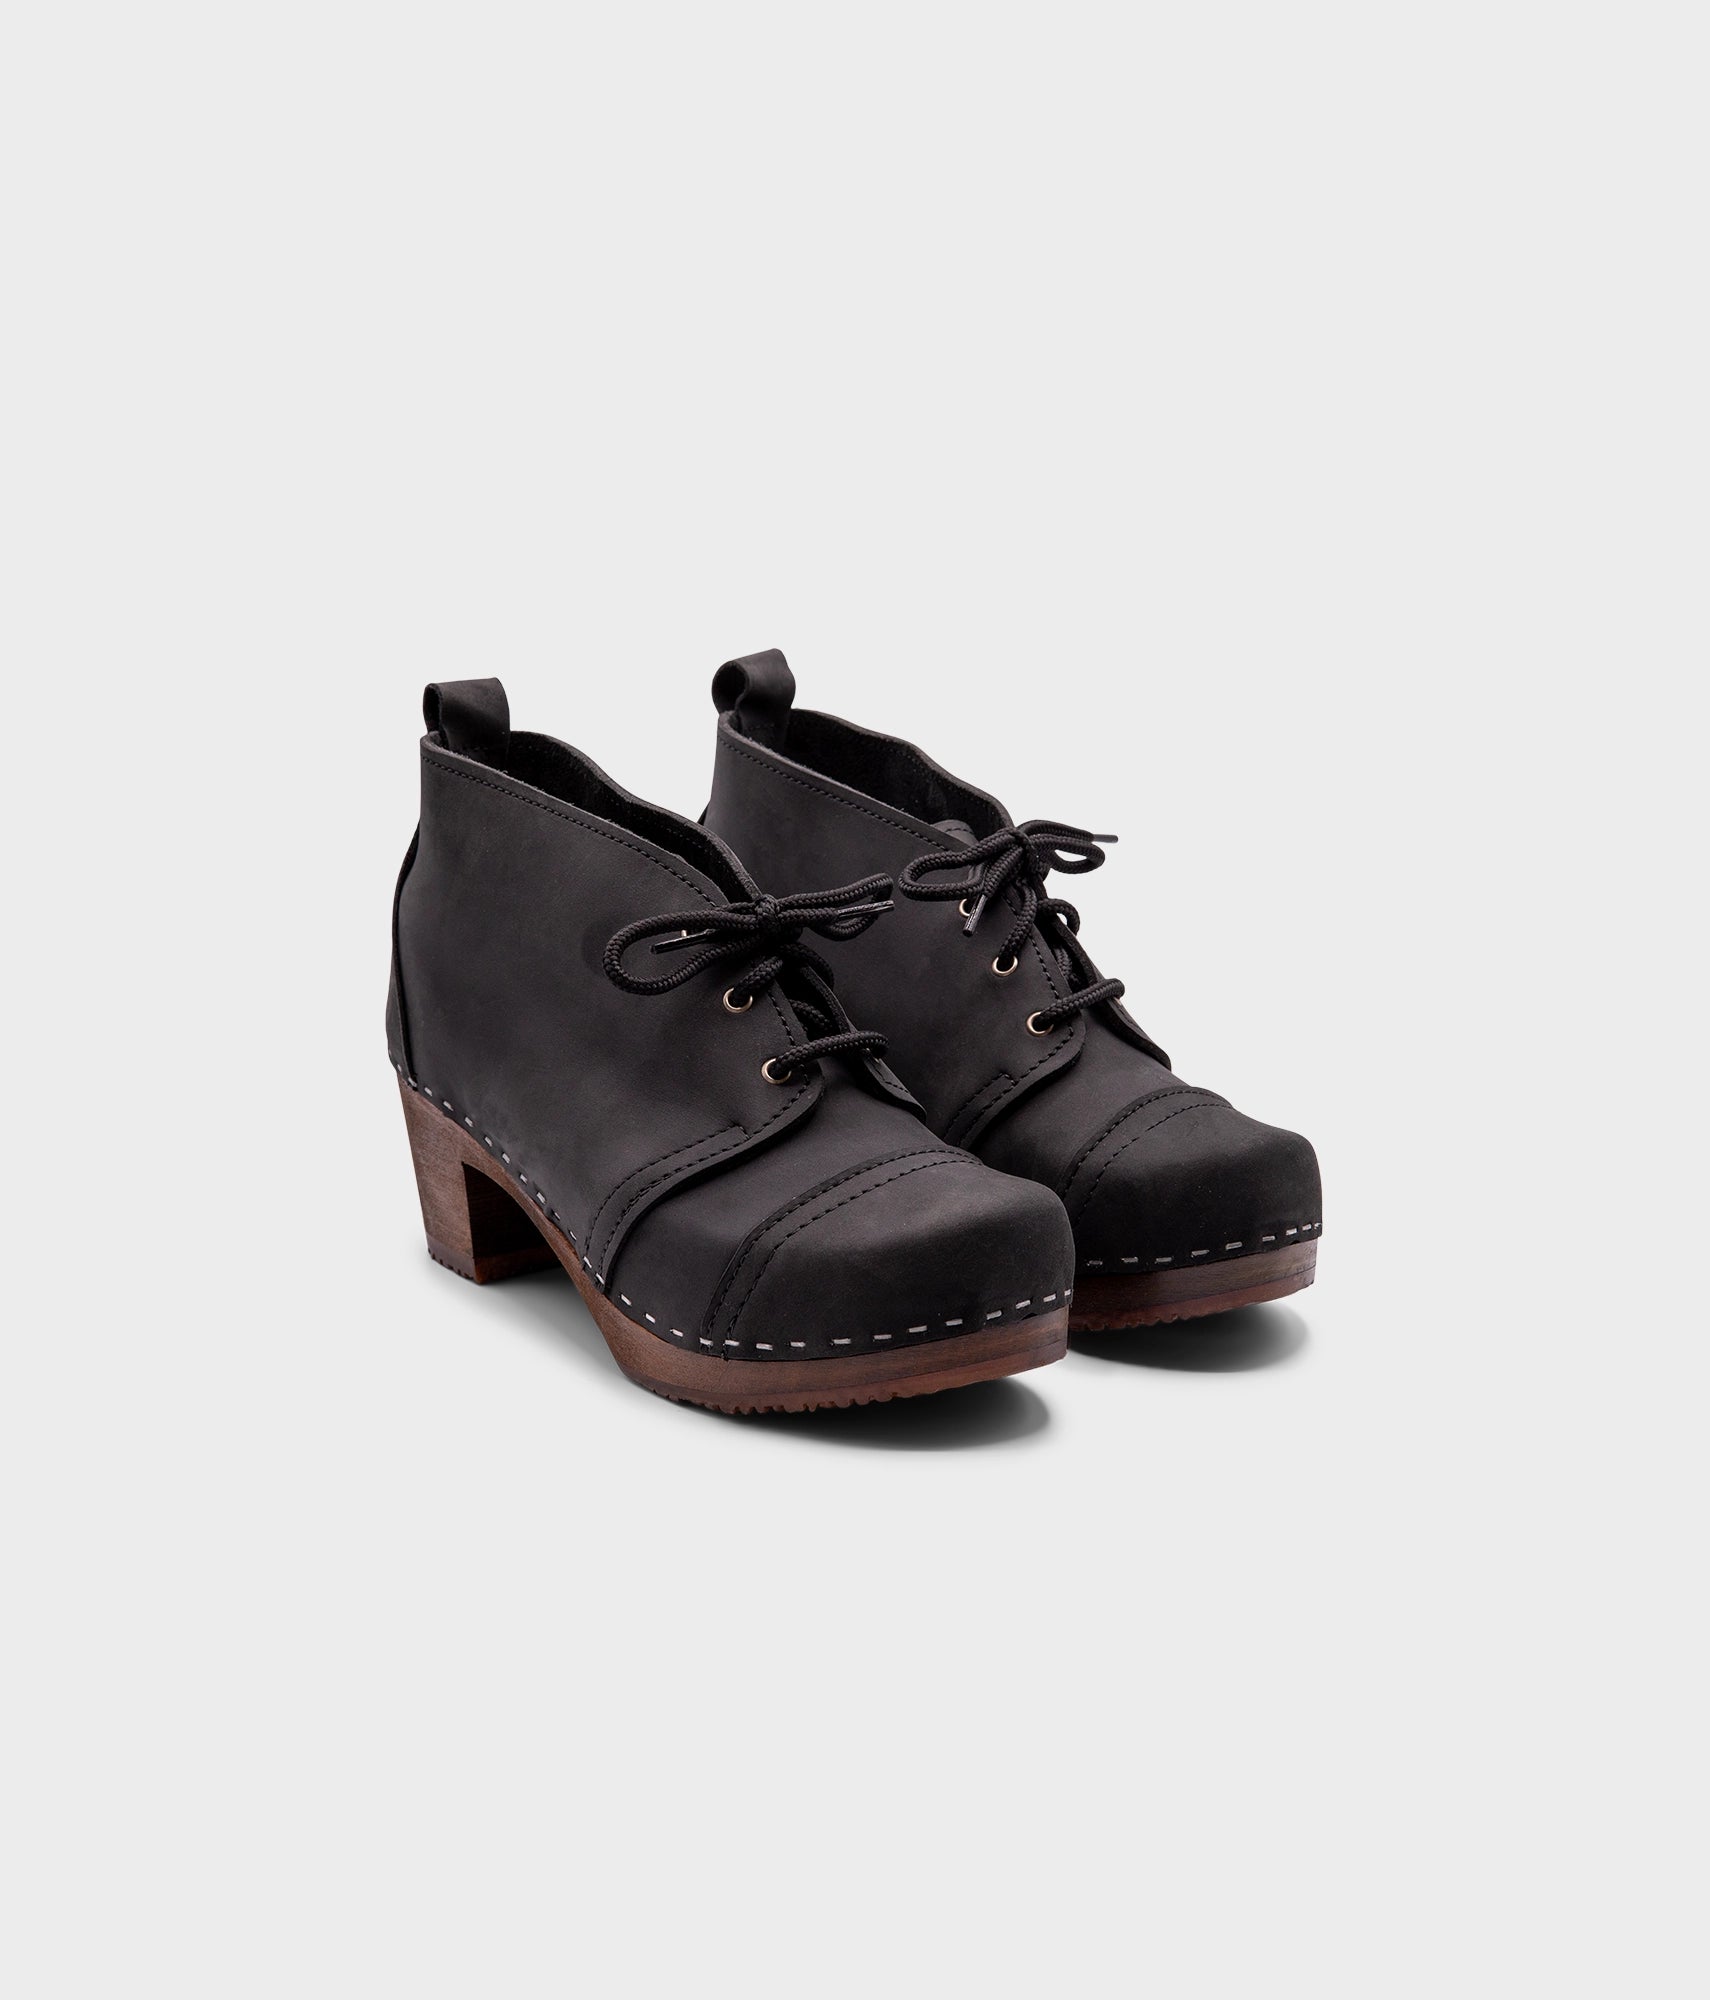 high heeled chukka clog boots in black nubuck leather stapled on a dark wooden base with black laces